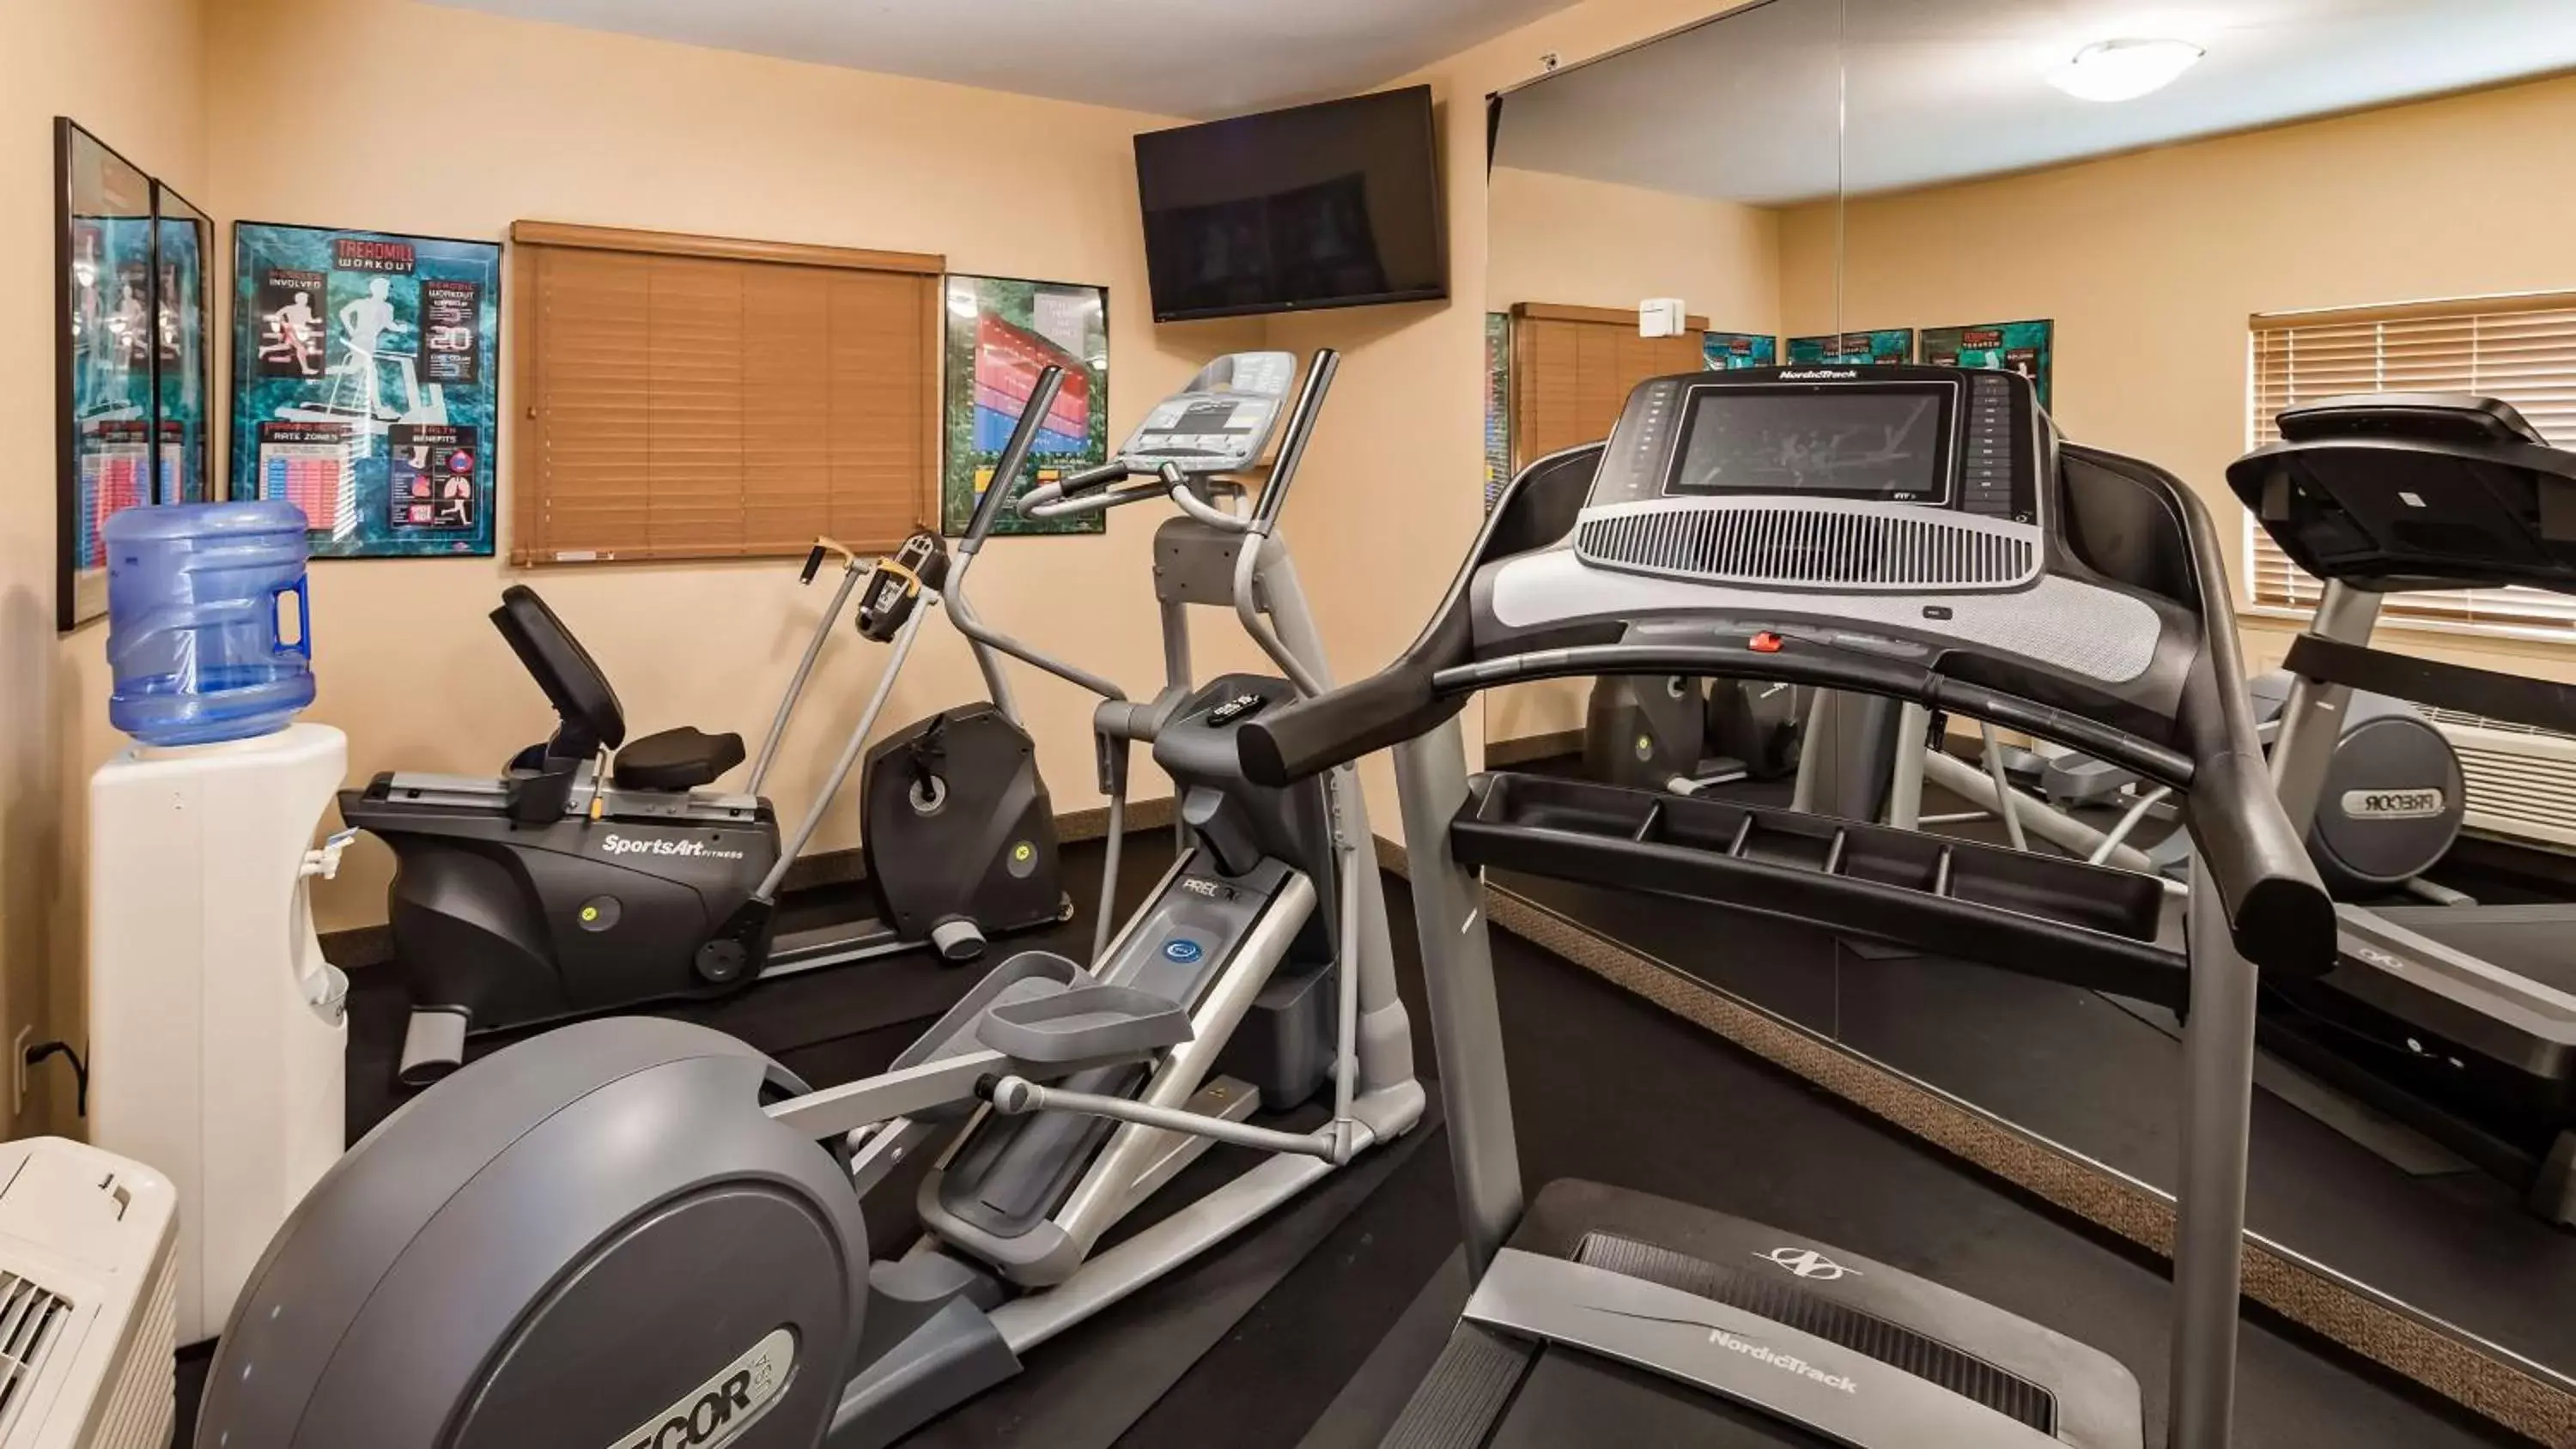 Fitness centre/facilities, Fitness Center/Facilities in Best Western Plus Wausau-Rothschild Hotel